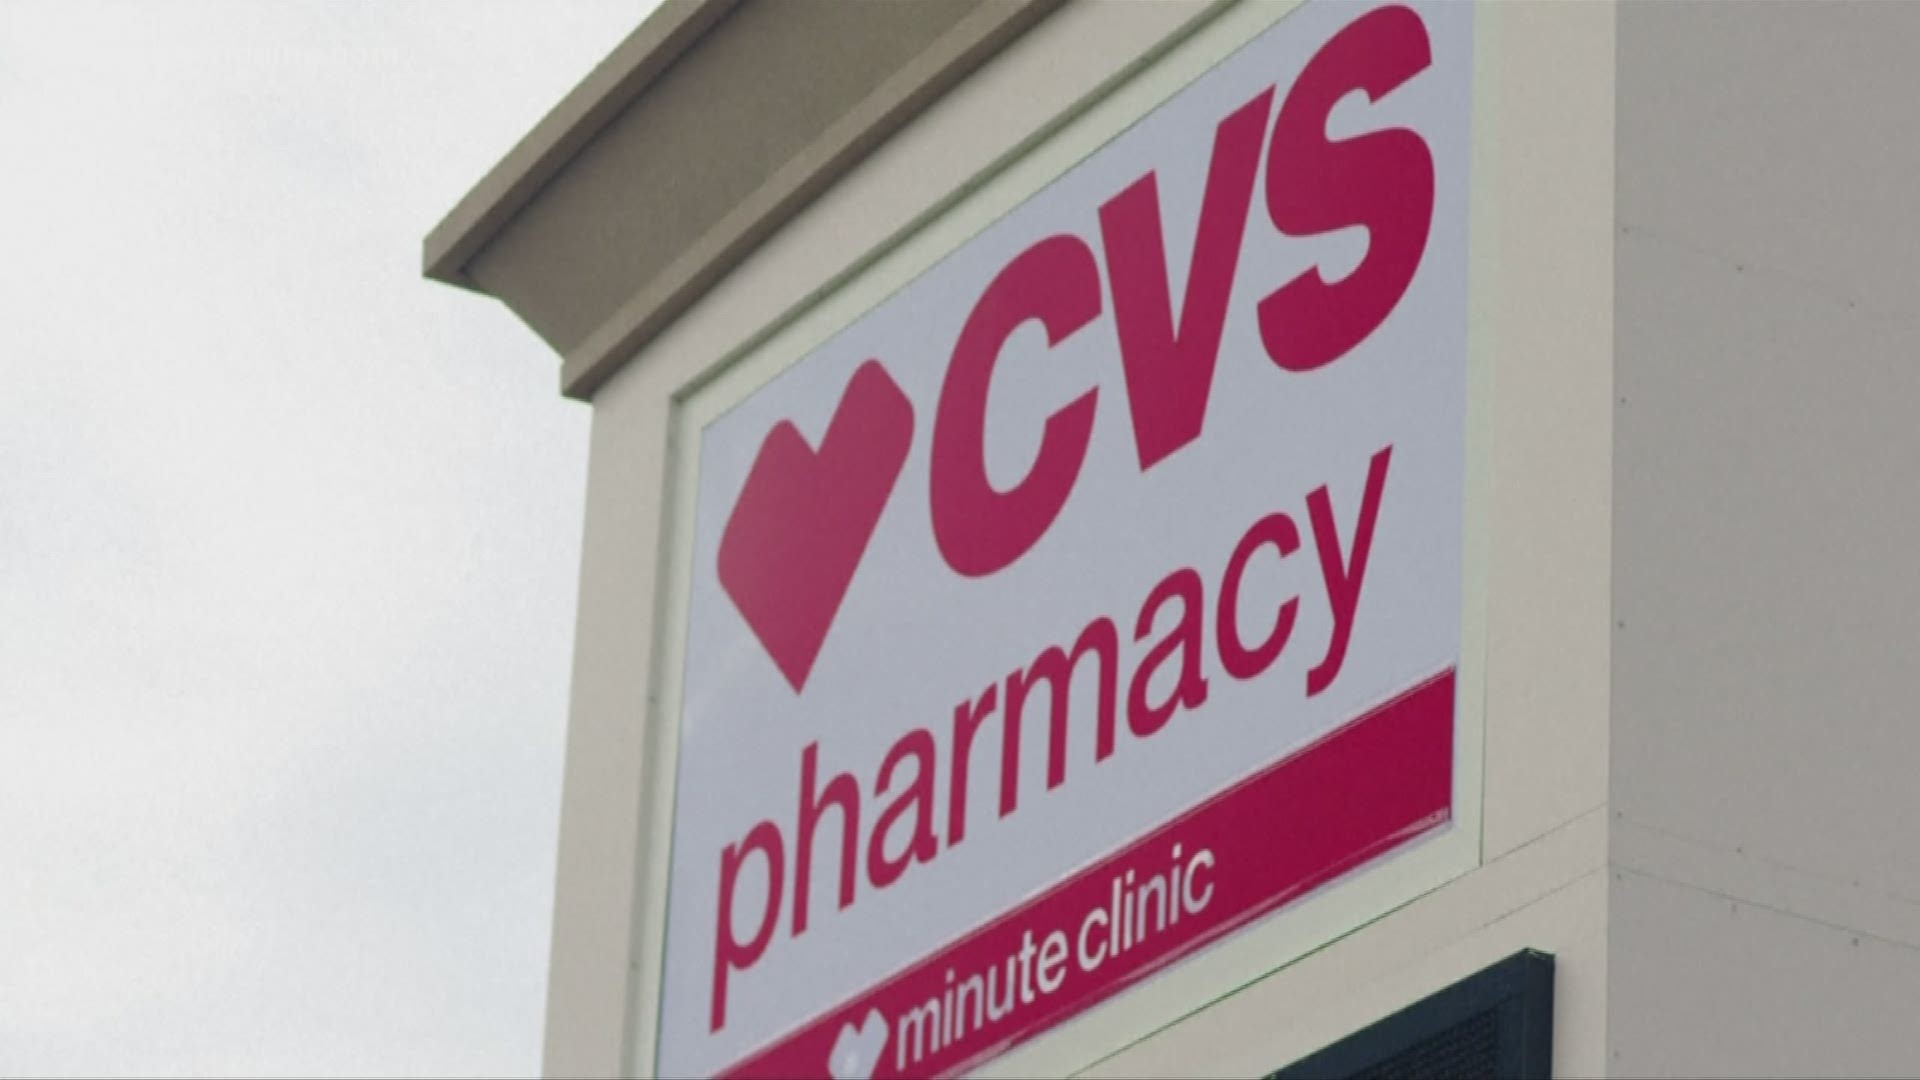 CVS has issued a recall alert. Some CVS branded eye-drops and eye ointments are being recalled because they may not be sterile.